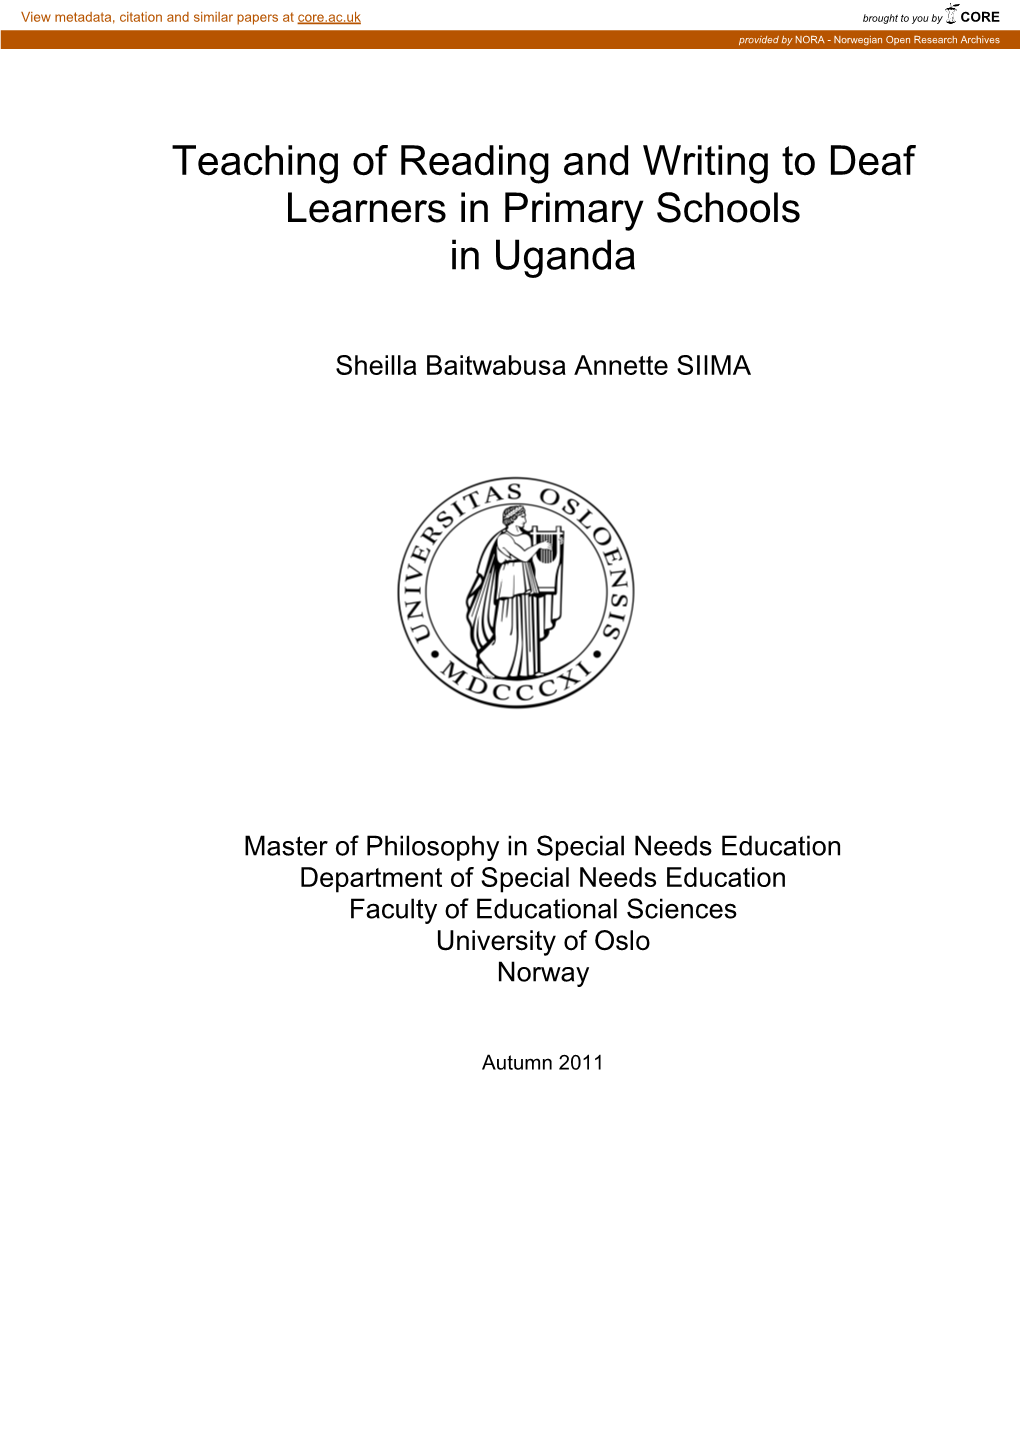 Teaching of Reading and Writing to Deaf Learners in Primary Schools in Uganda